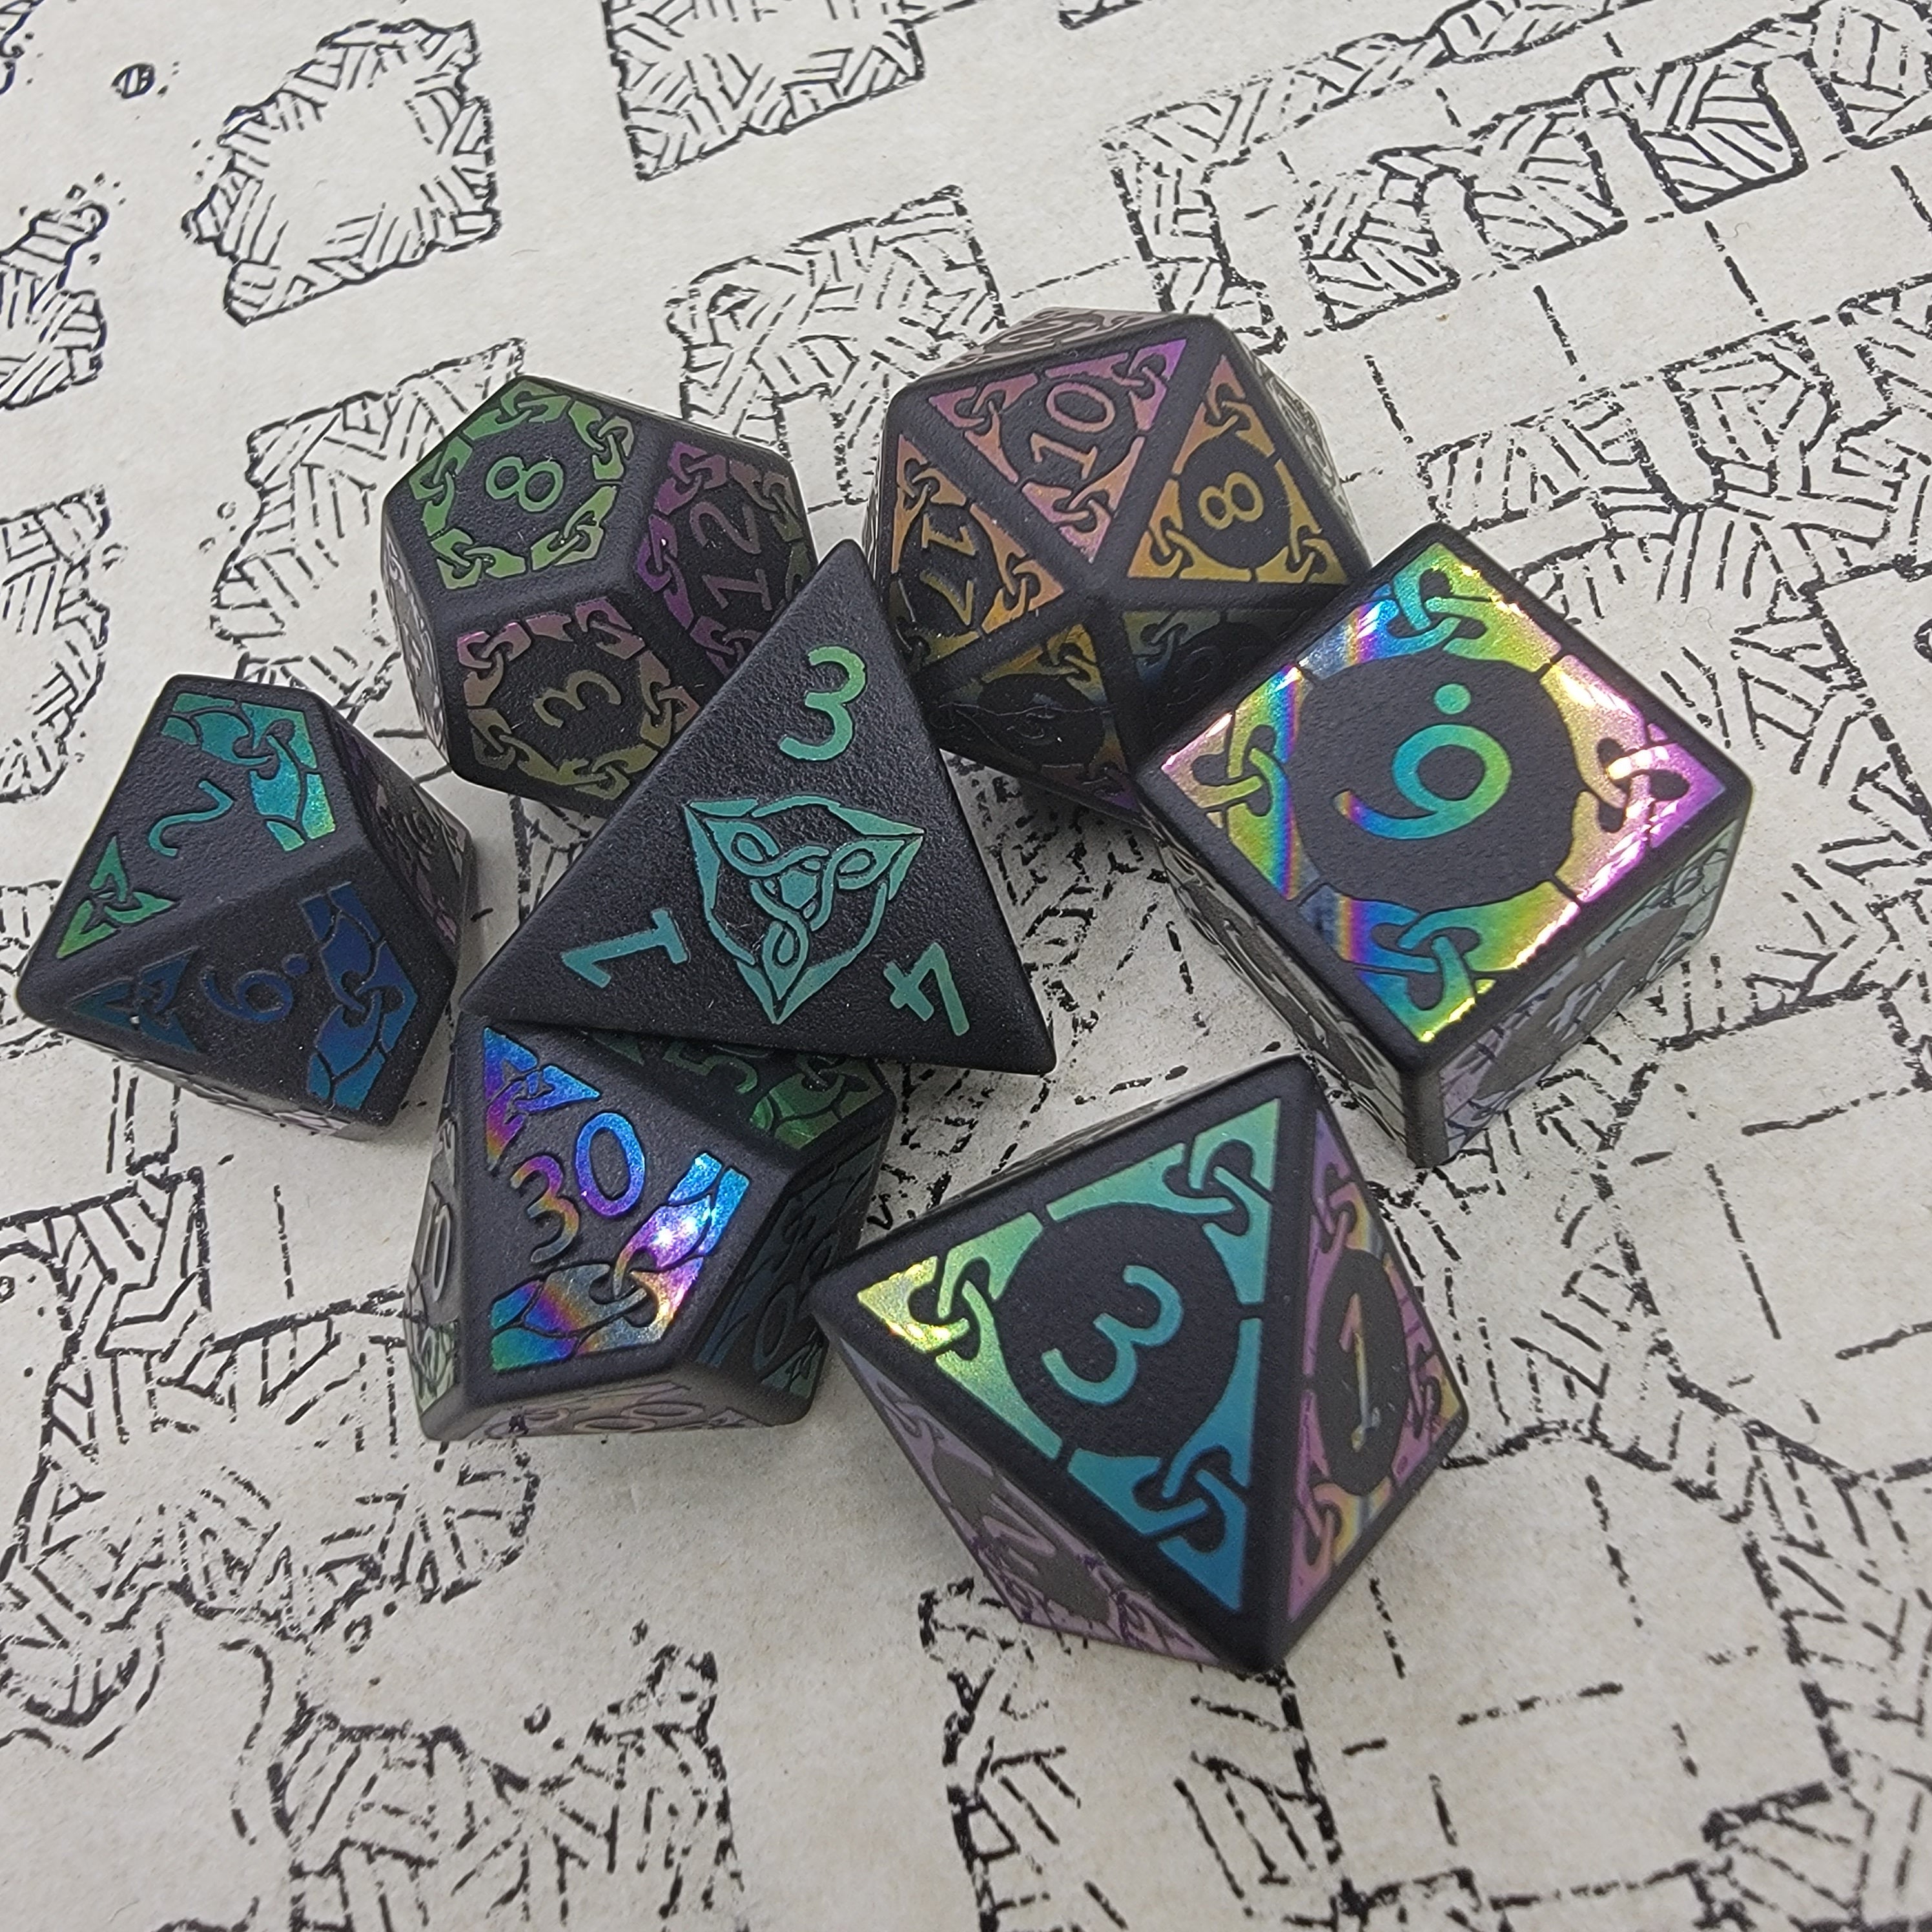 Obsidian Bifrost Stone Dice Set| RPG Dice | Polyhedral Dice Set | Dungeons & Dragons | DnD Dice Set | Metal Dice Set | Stone Dice Set